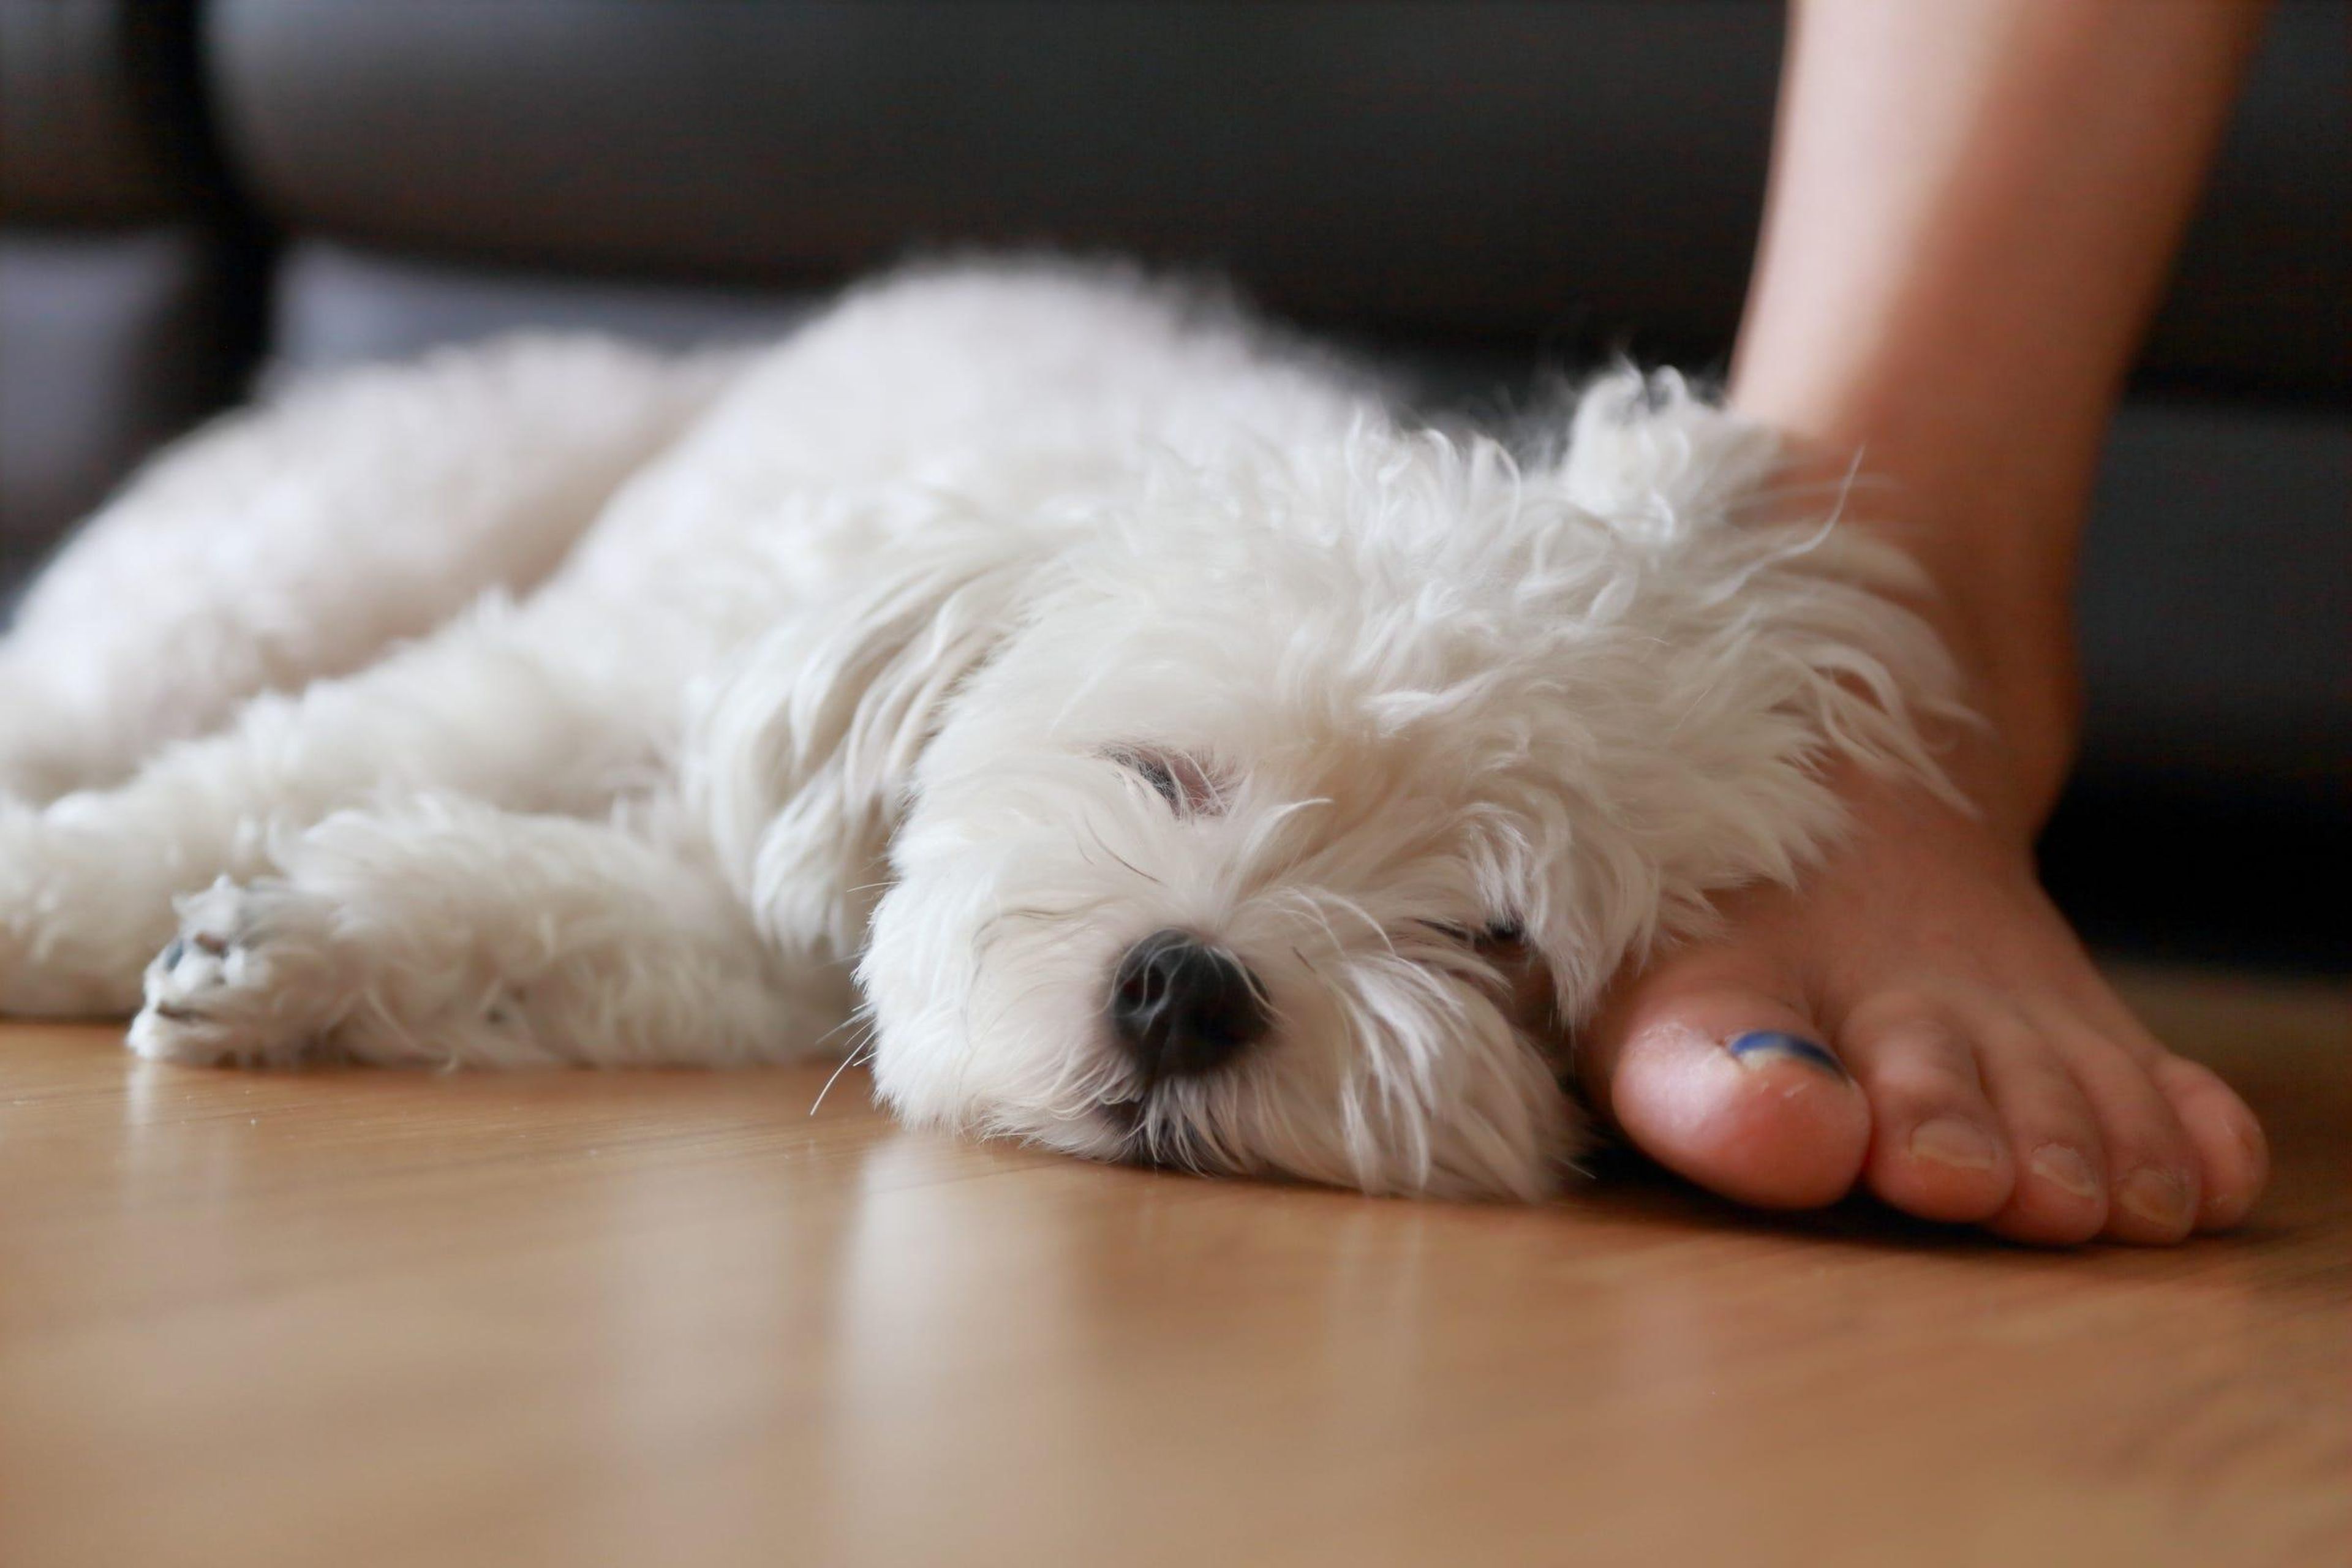 Keep your home environment as peaceful as possible to help active pets calm down.